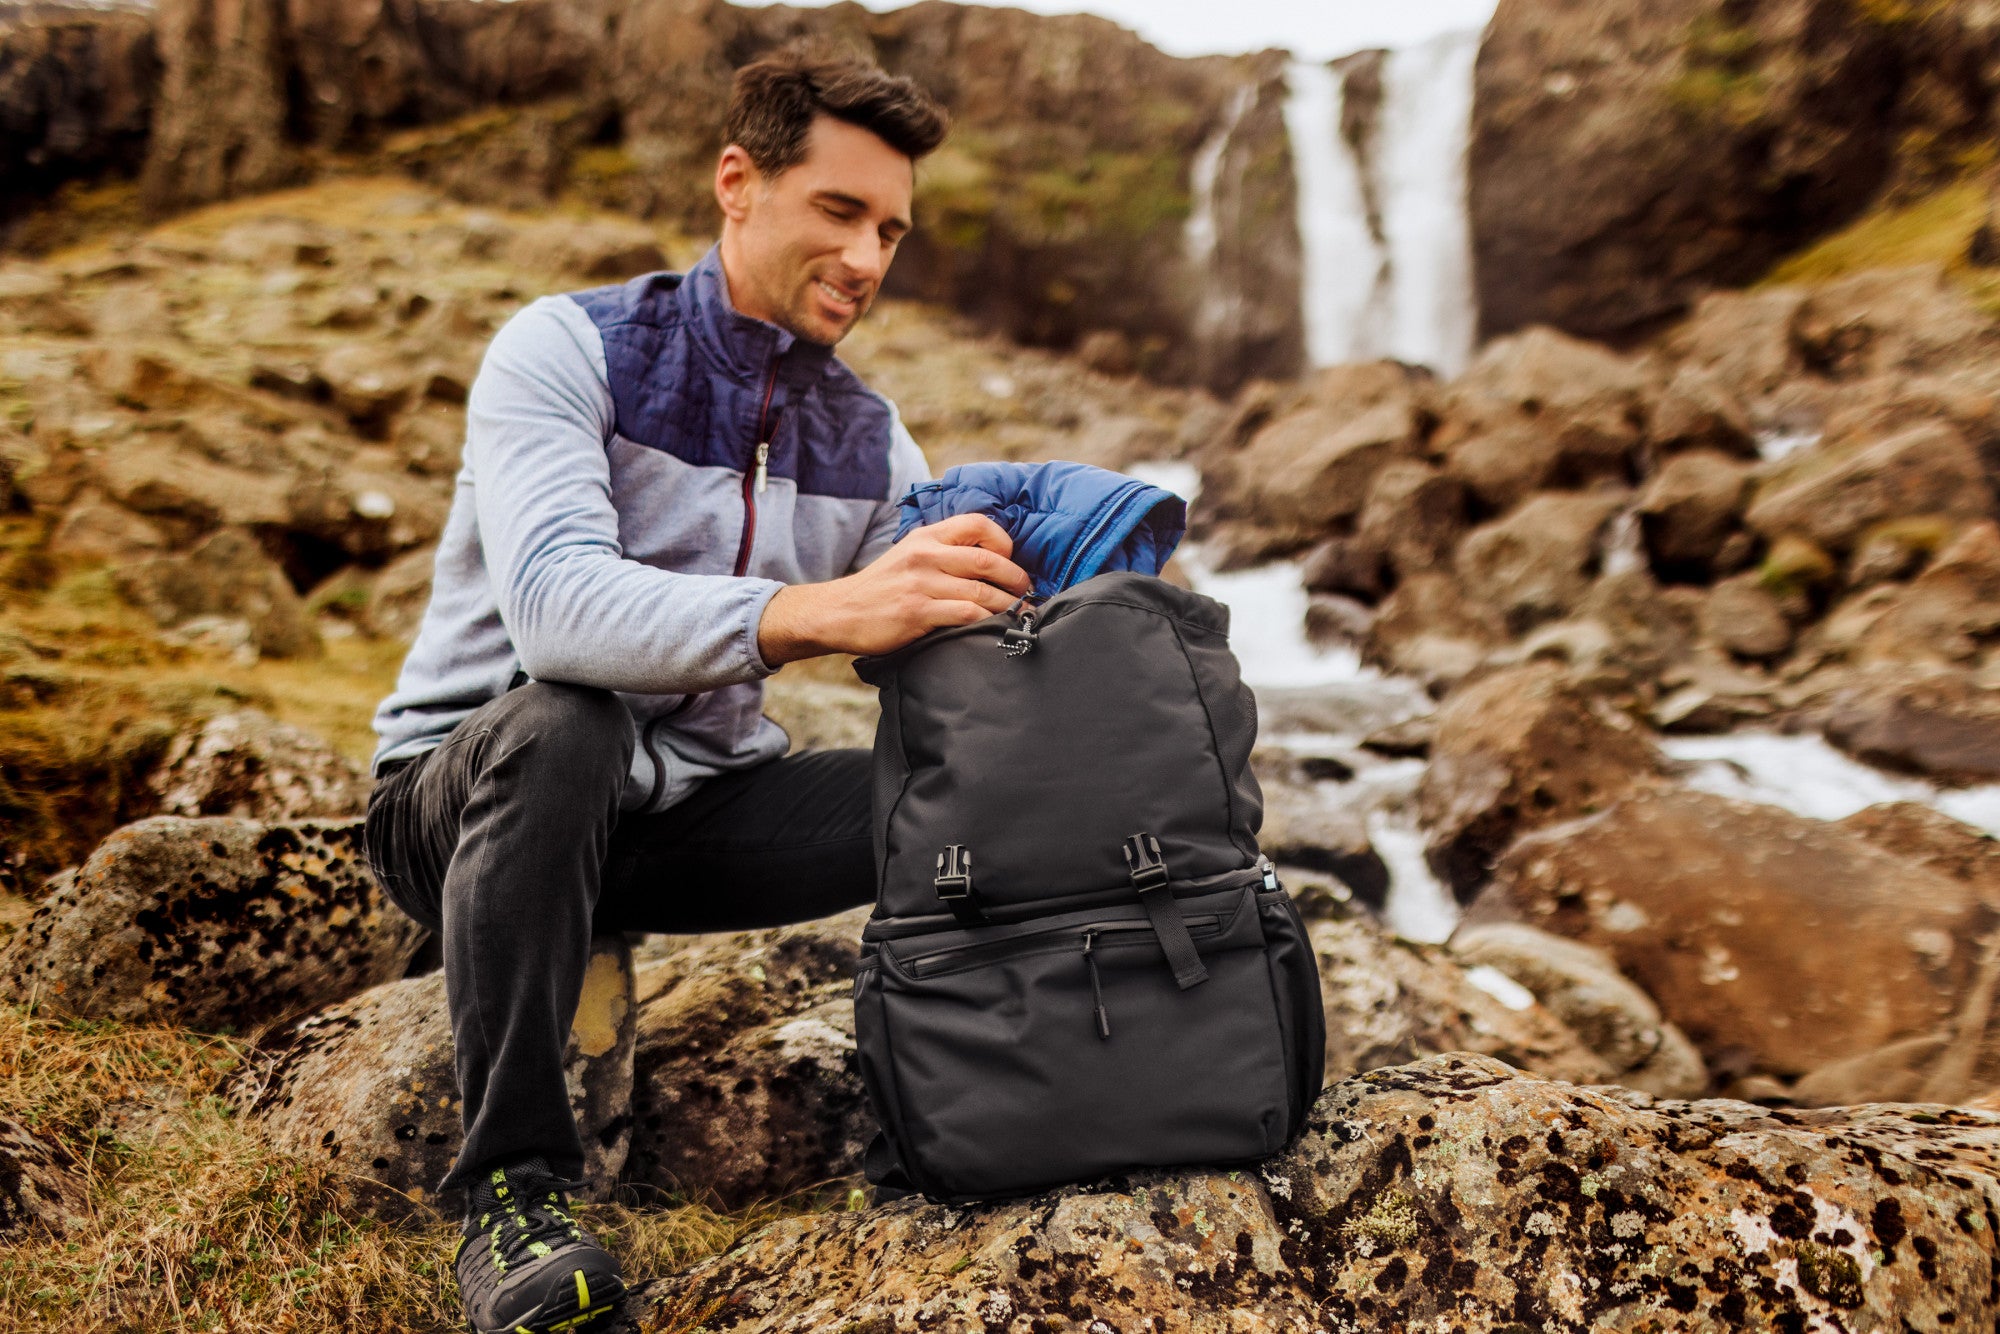 Tarana Backpack Cooler - Stylish & Eco-Friendly for On-the-Go – PICNIC TIME  FAMILY OF BRANDS